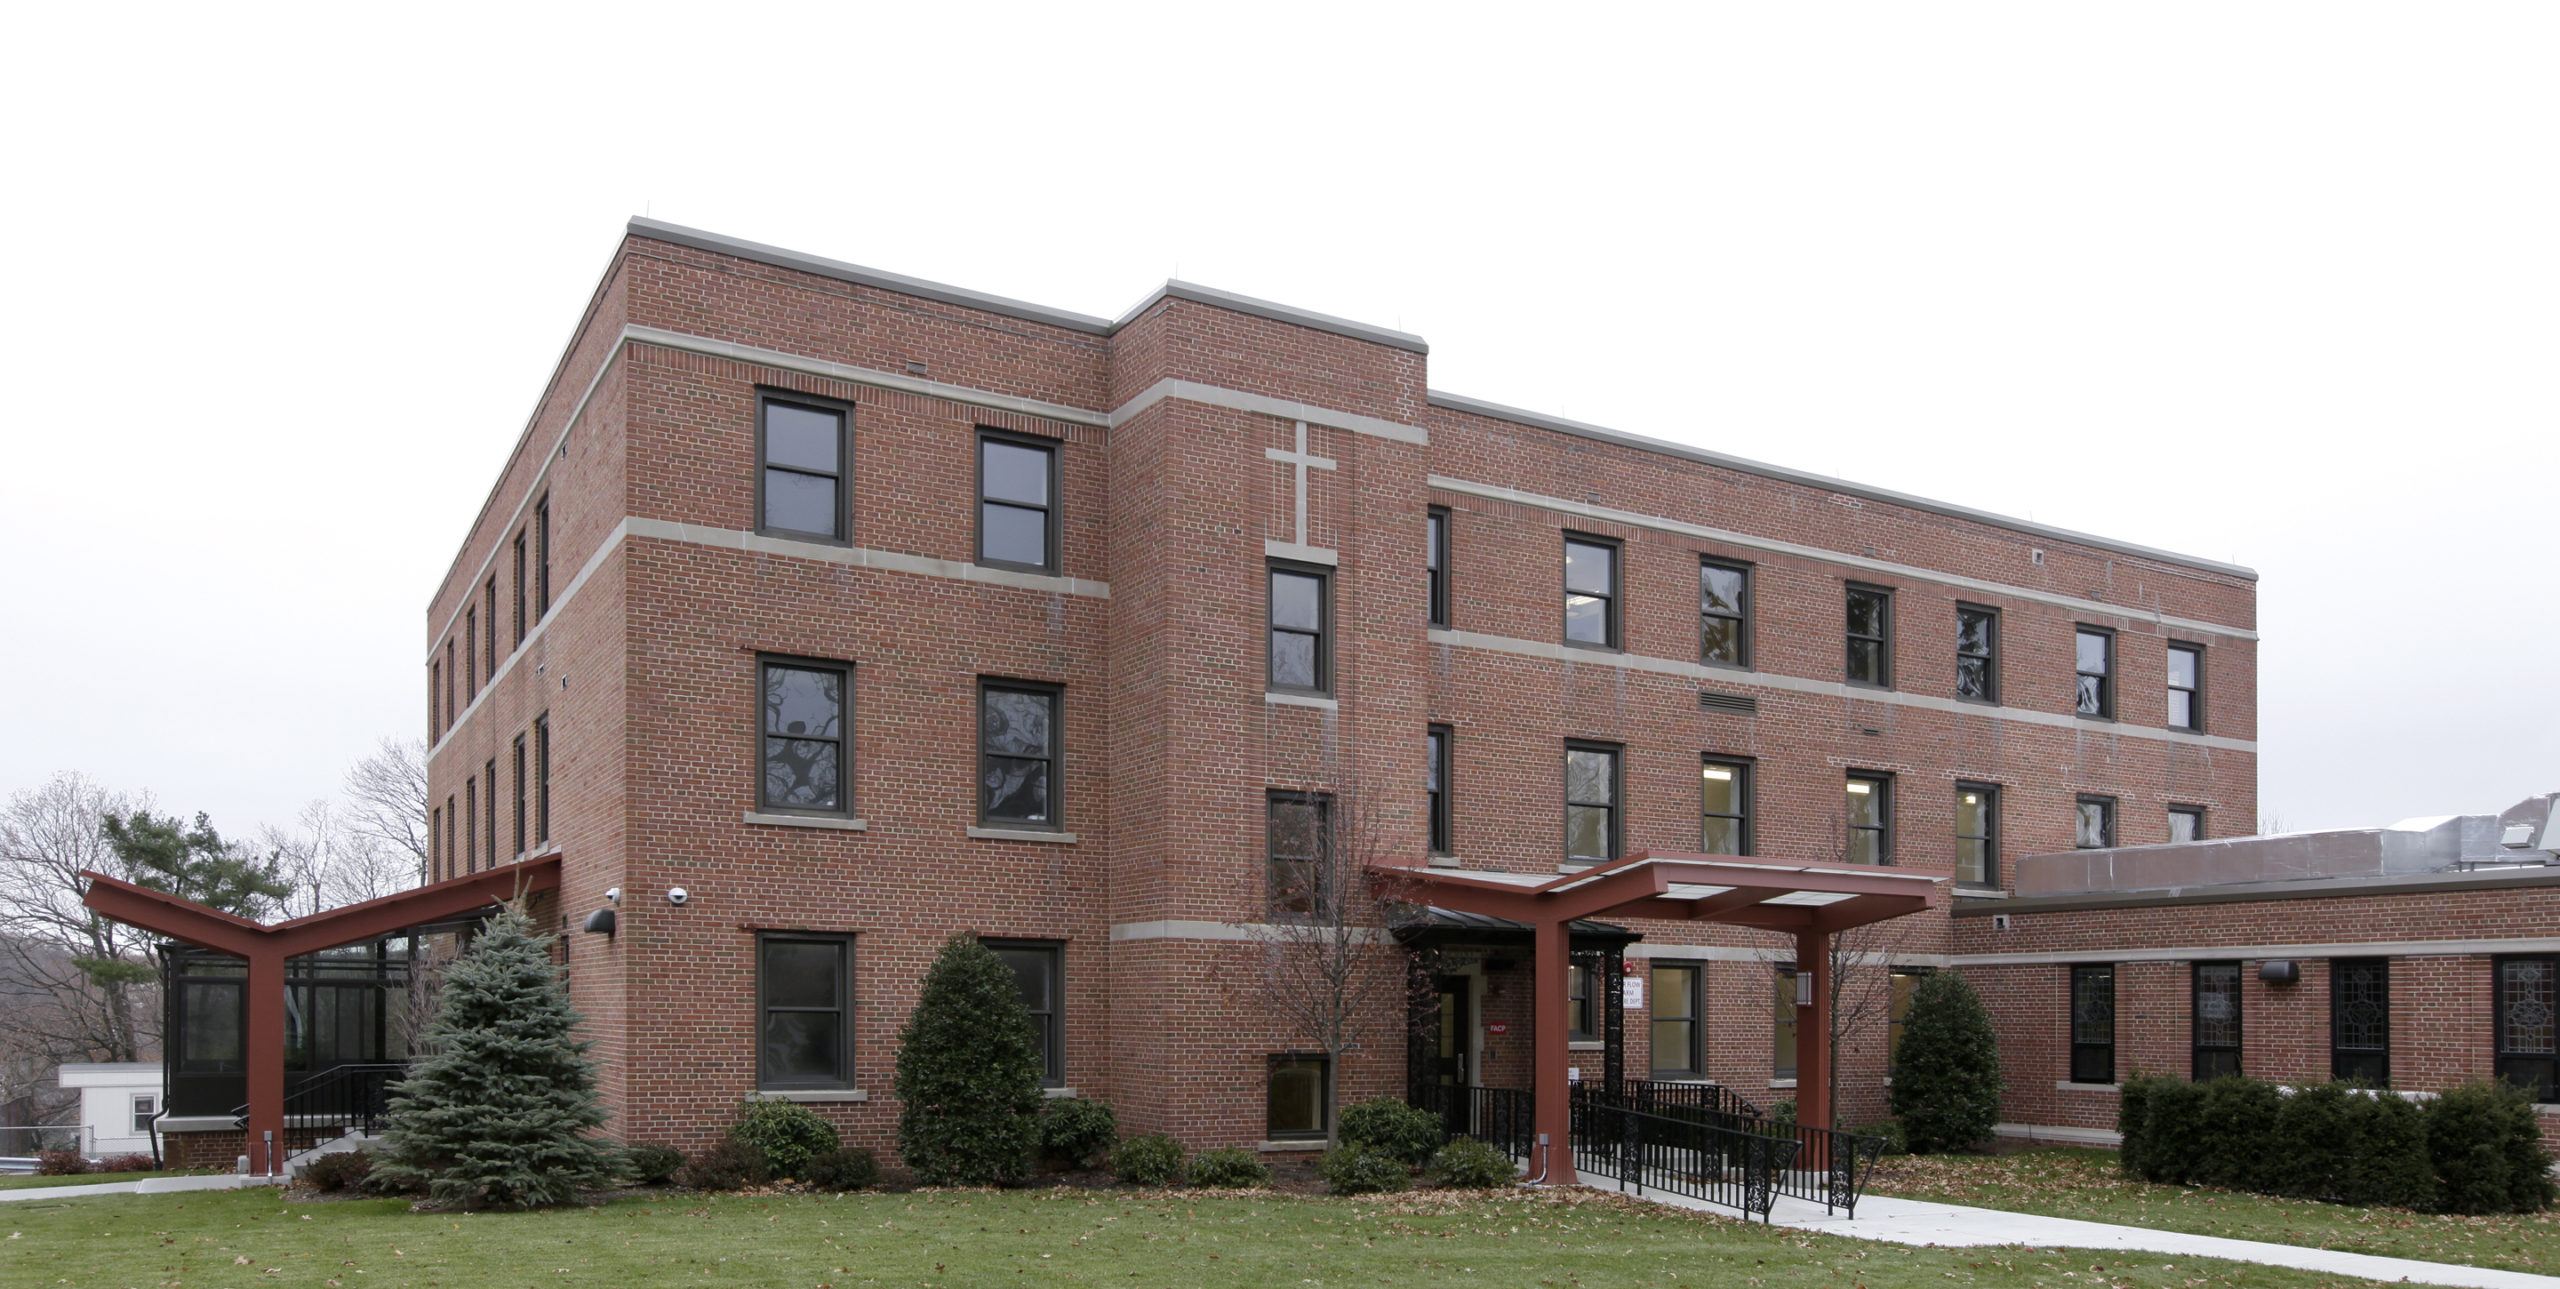 Exterior of St. Dominic's High School in Oyster Bay